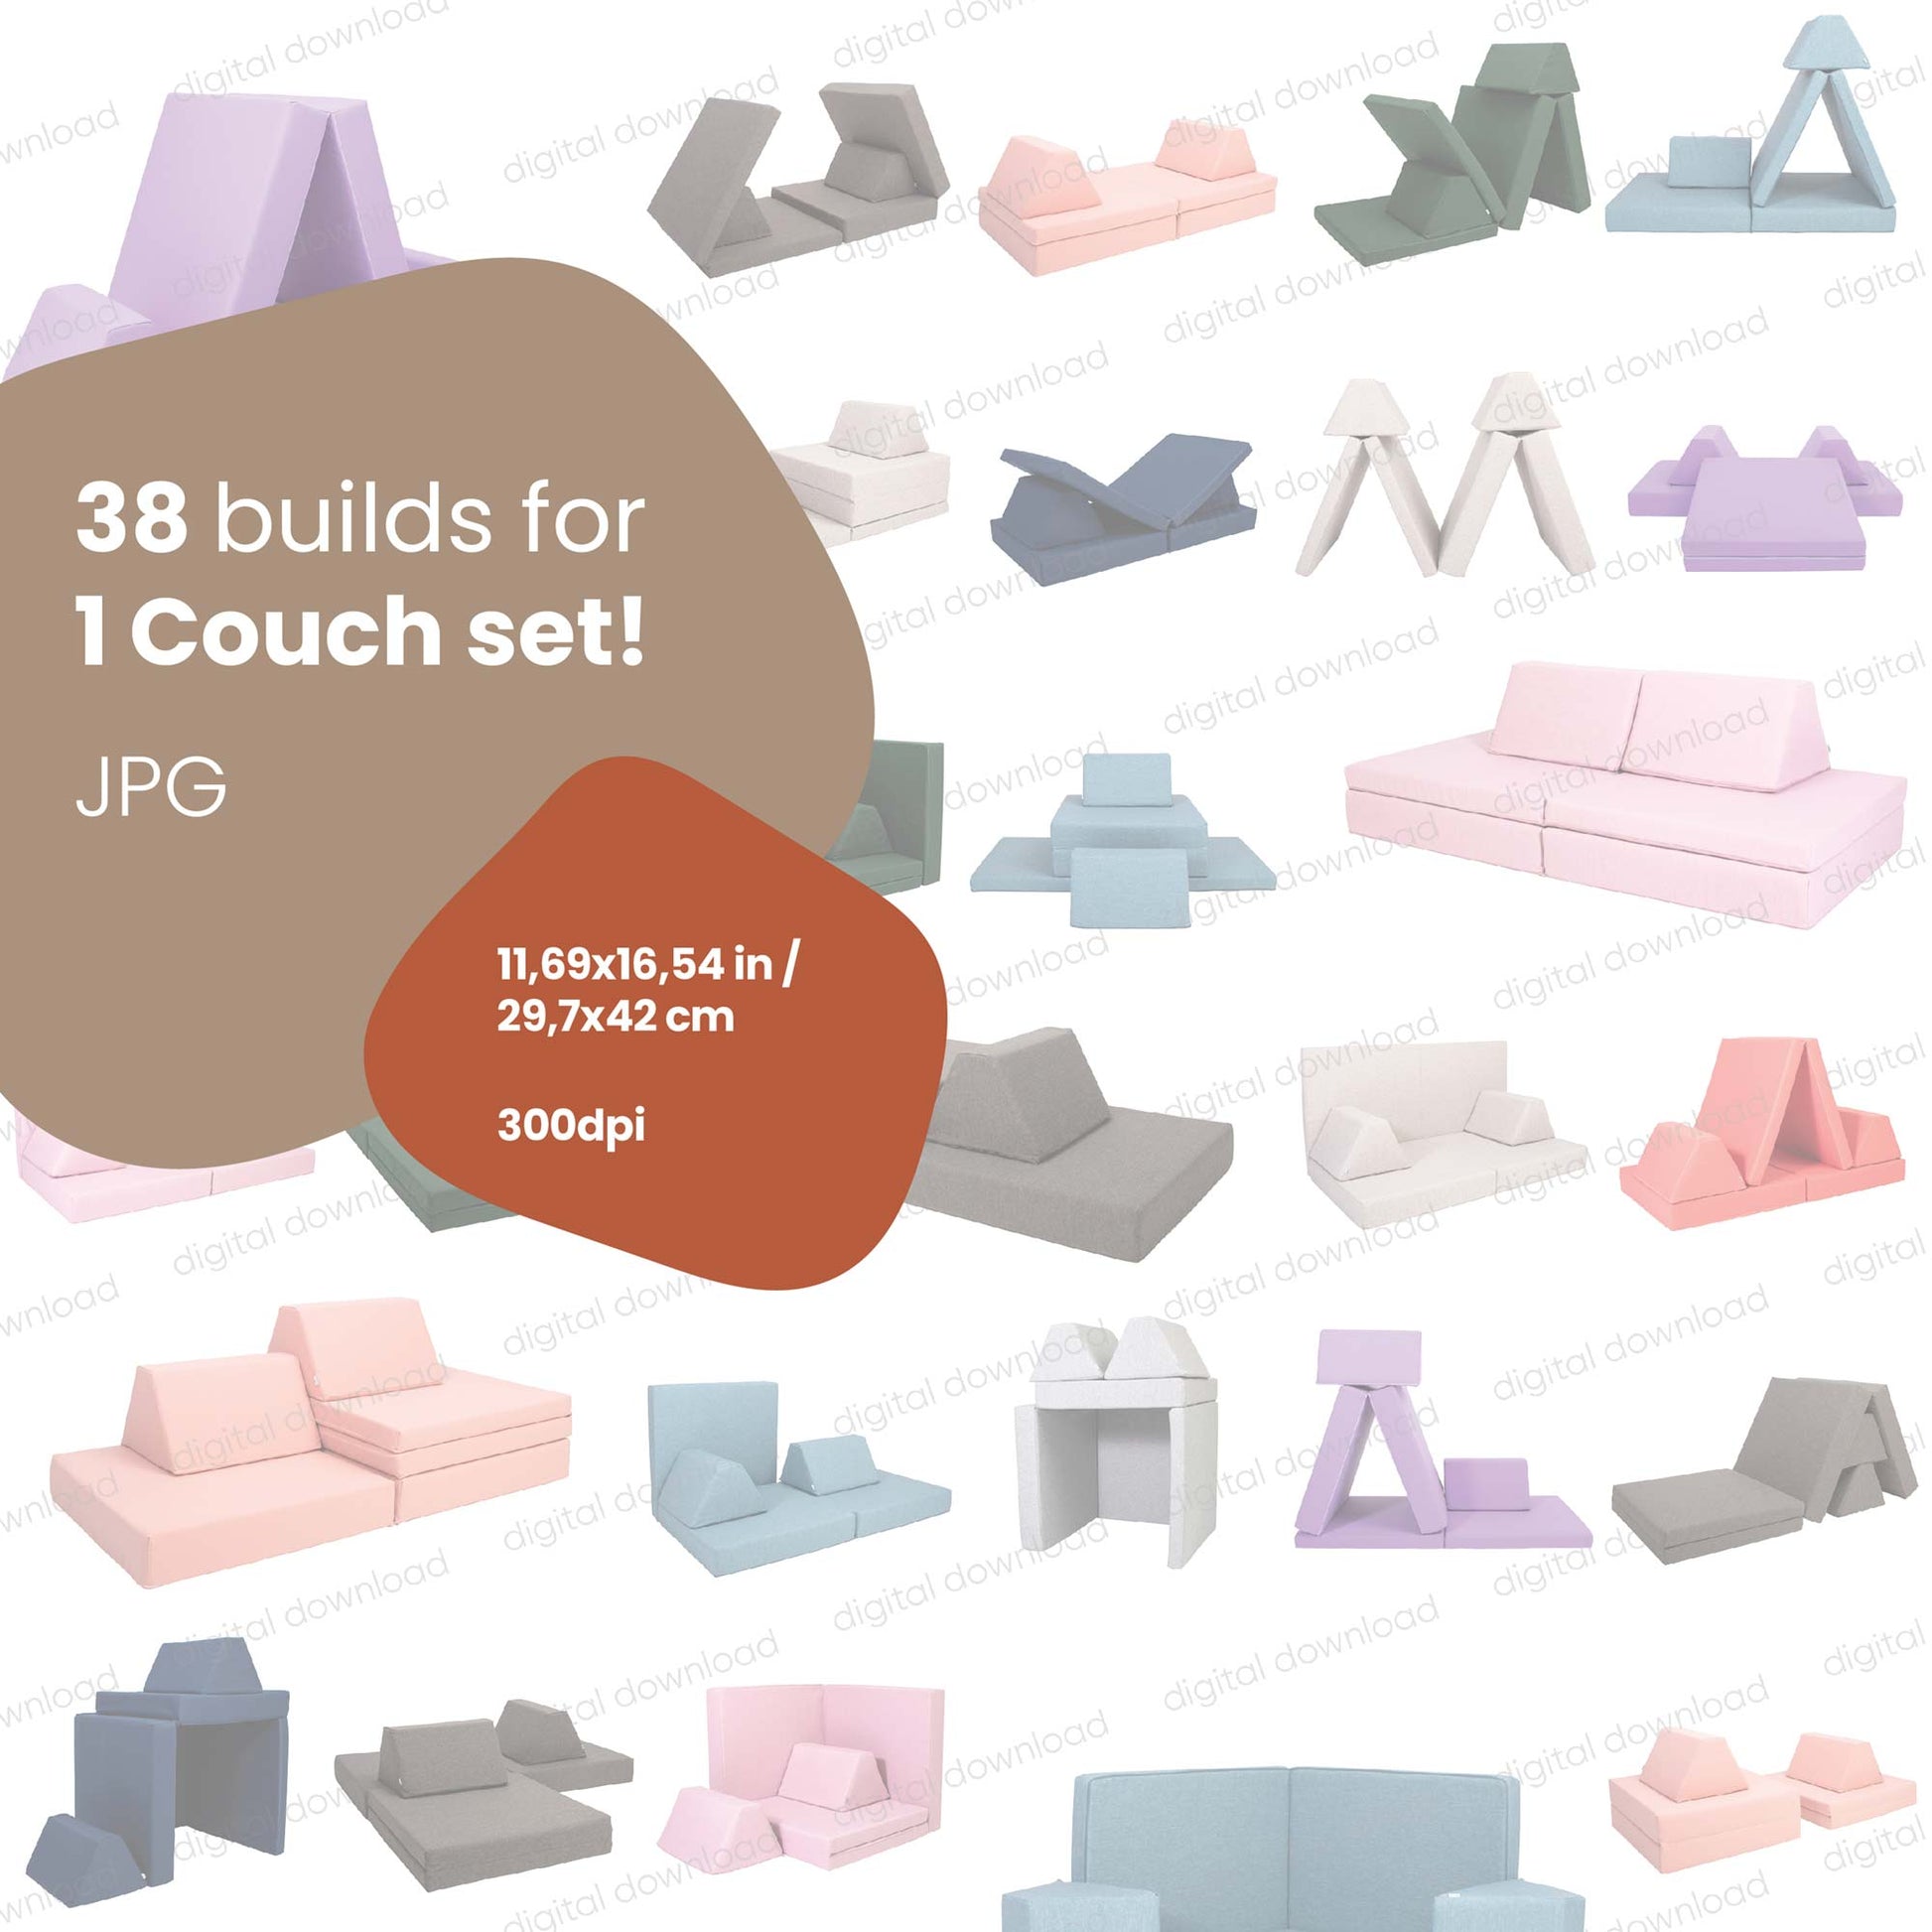 38 Activity sofa build ideas posters - Colorful | digital download sets from Sweet HOME from wood.